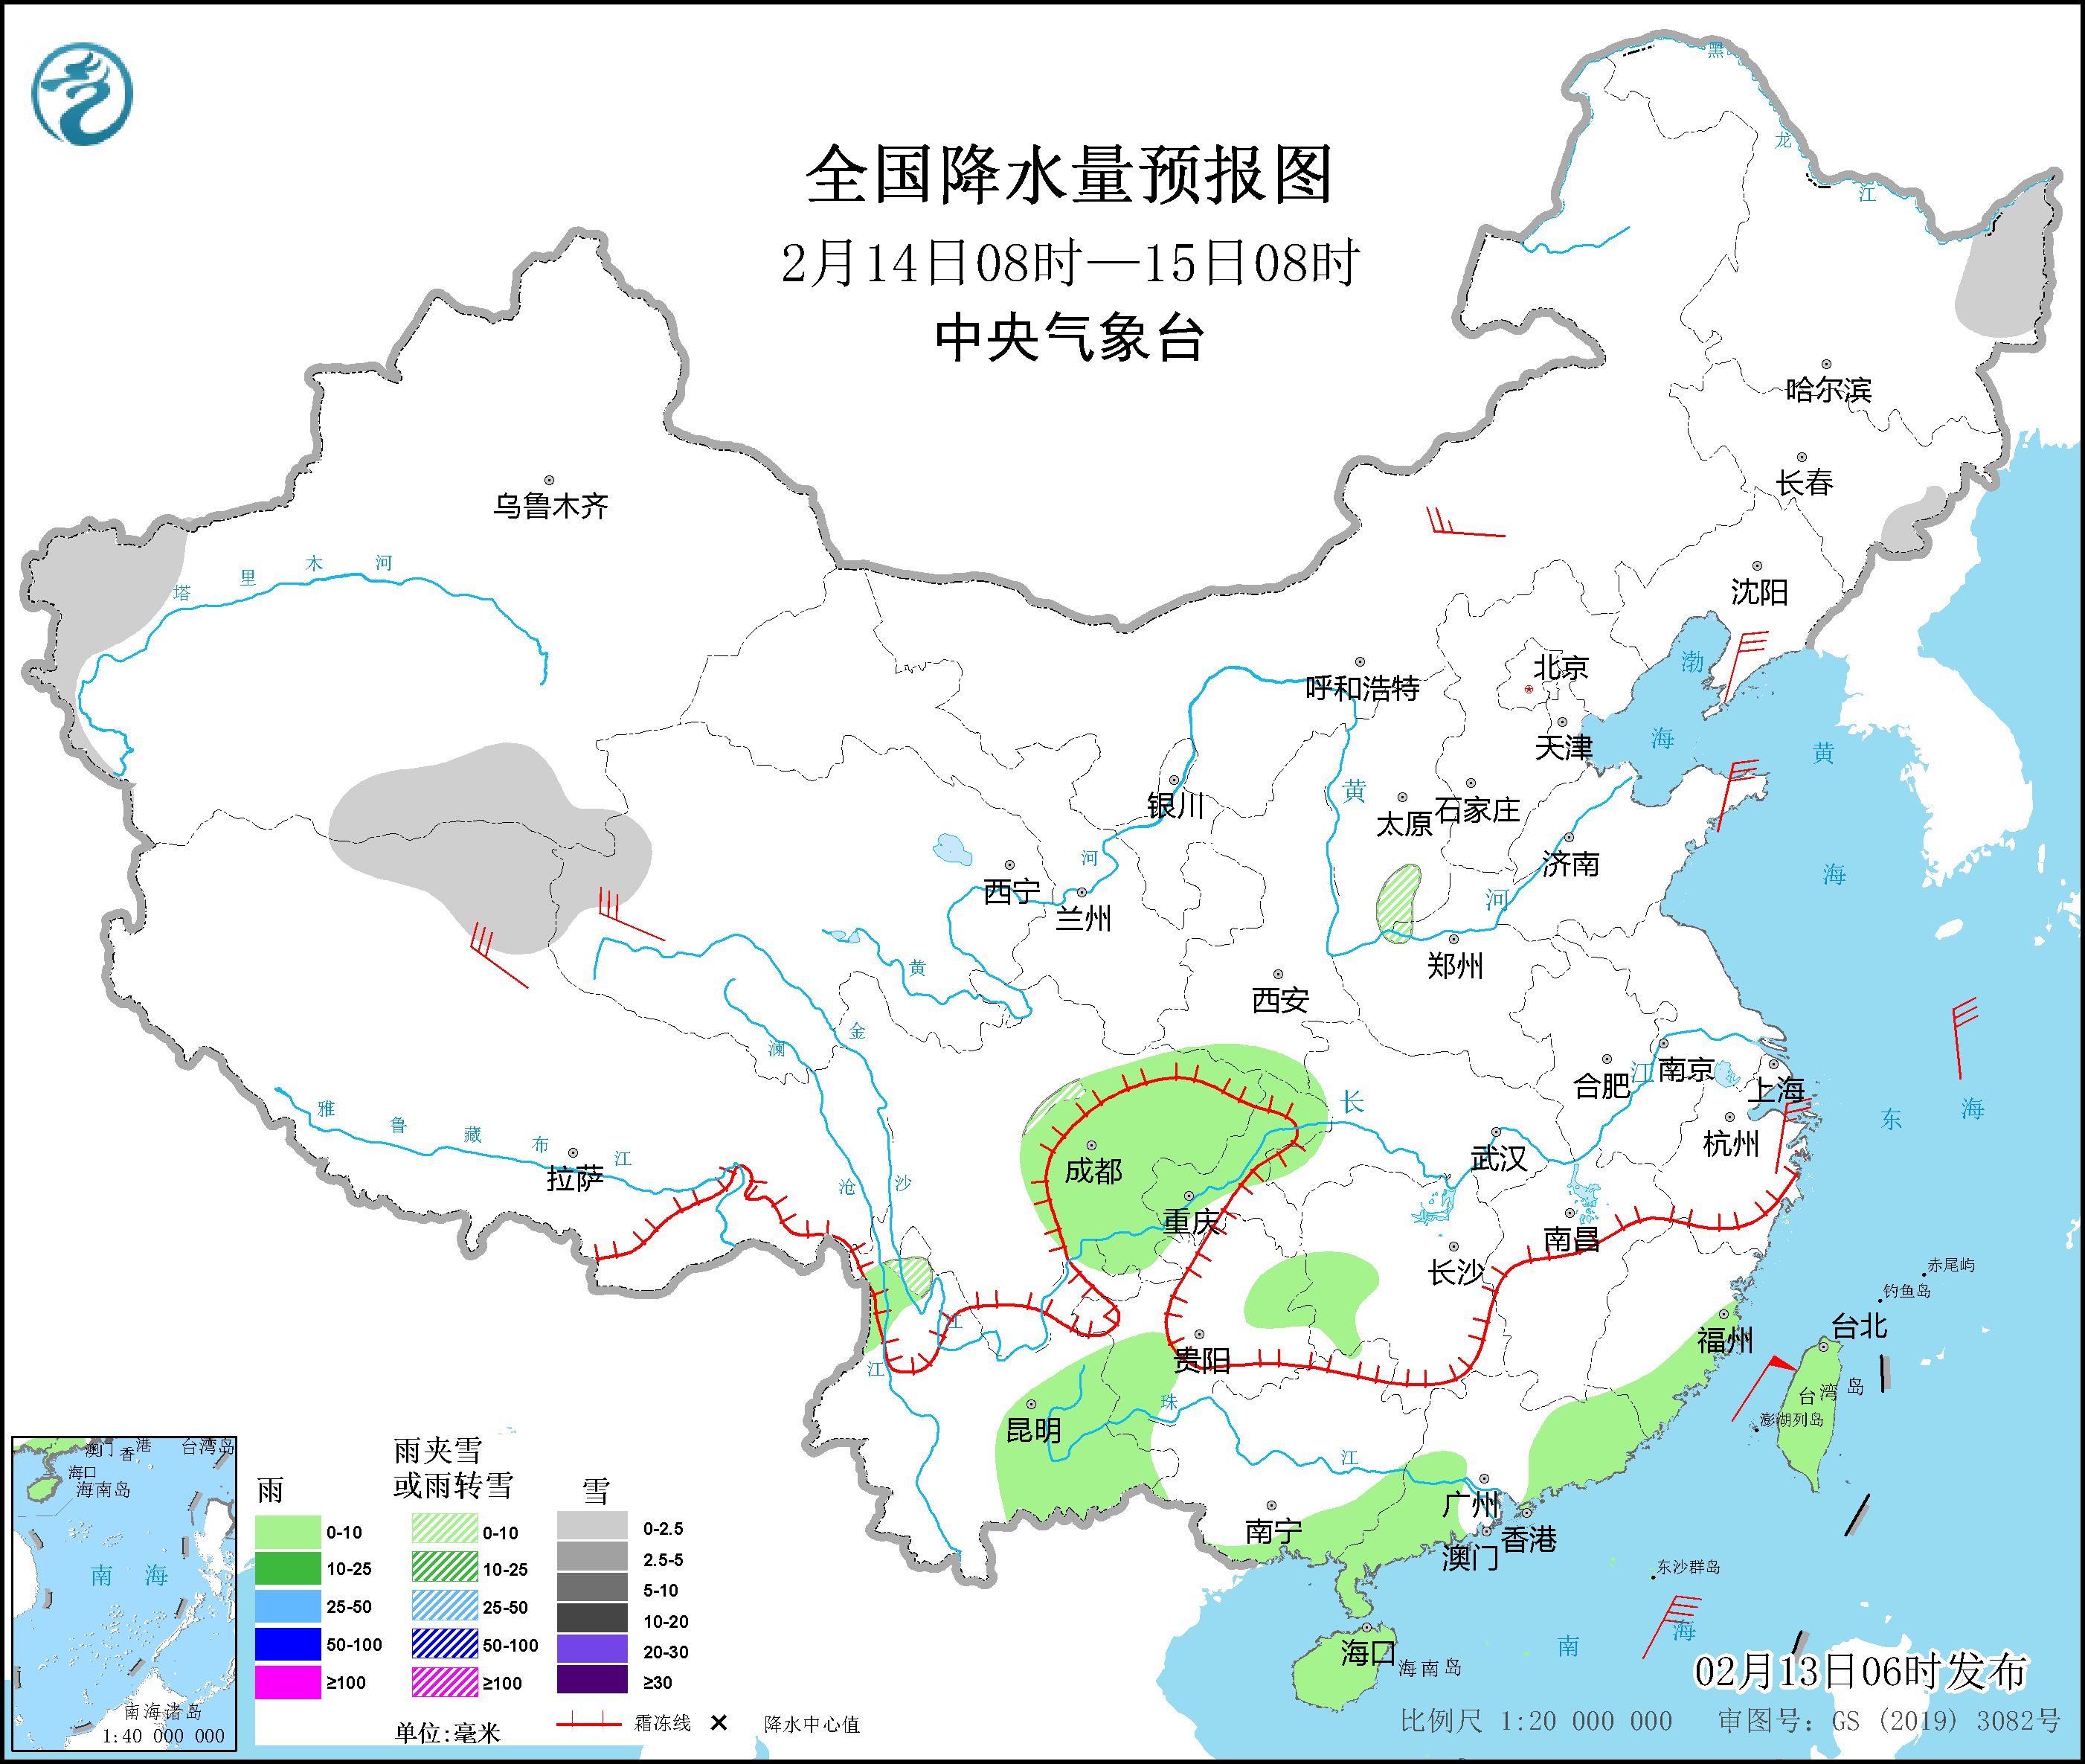 There is rain and snow in the central and eastern parts of Northwest China and the cold air continues to affect the southern region